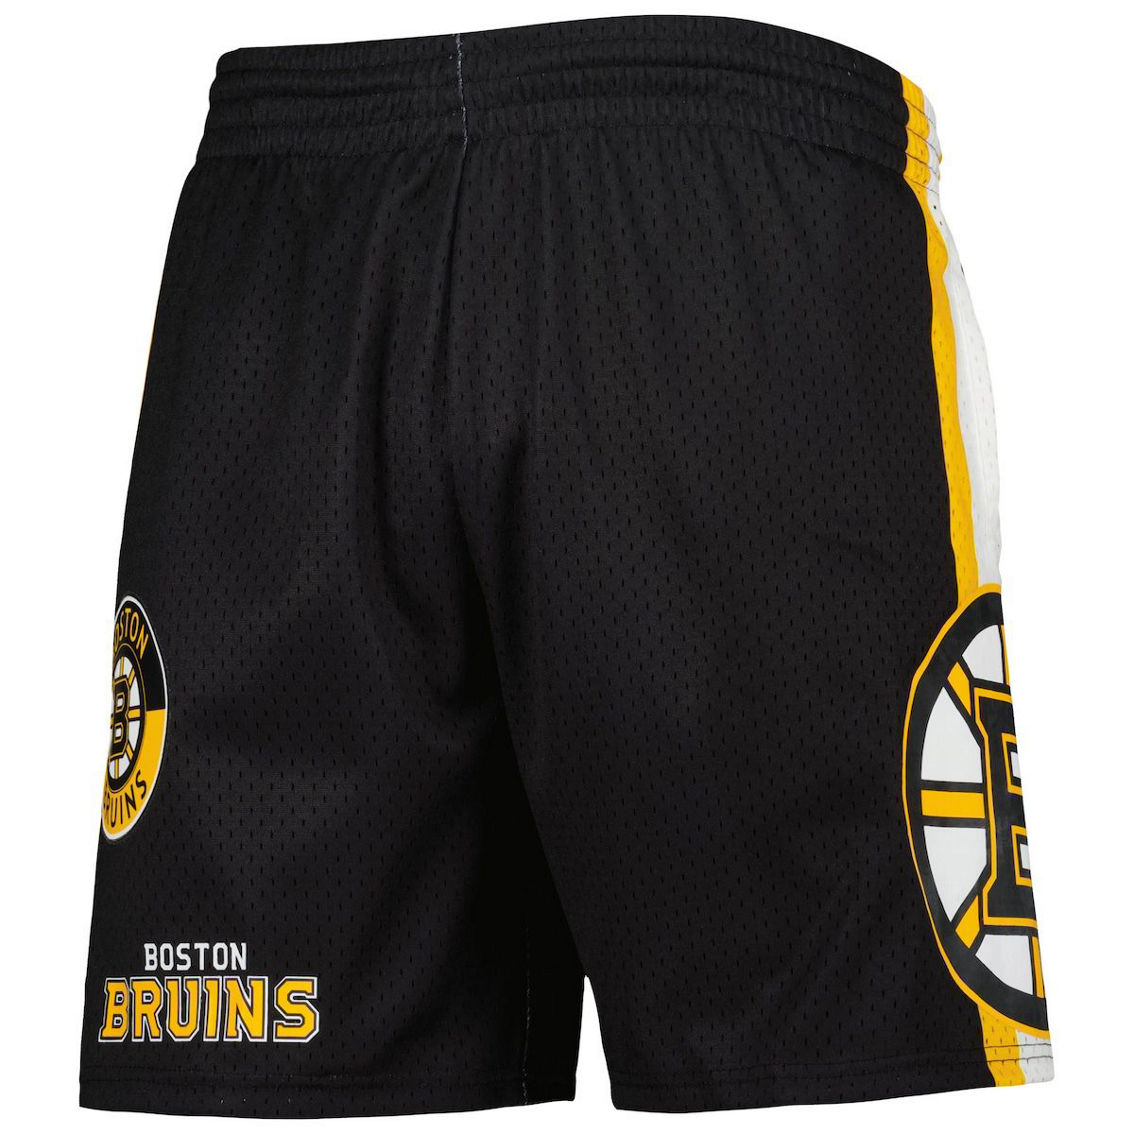 Mitchell & Ness Men's Black Boston Bruins City Collection Mesh Shorts - Image 3 of 4